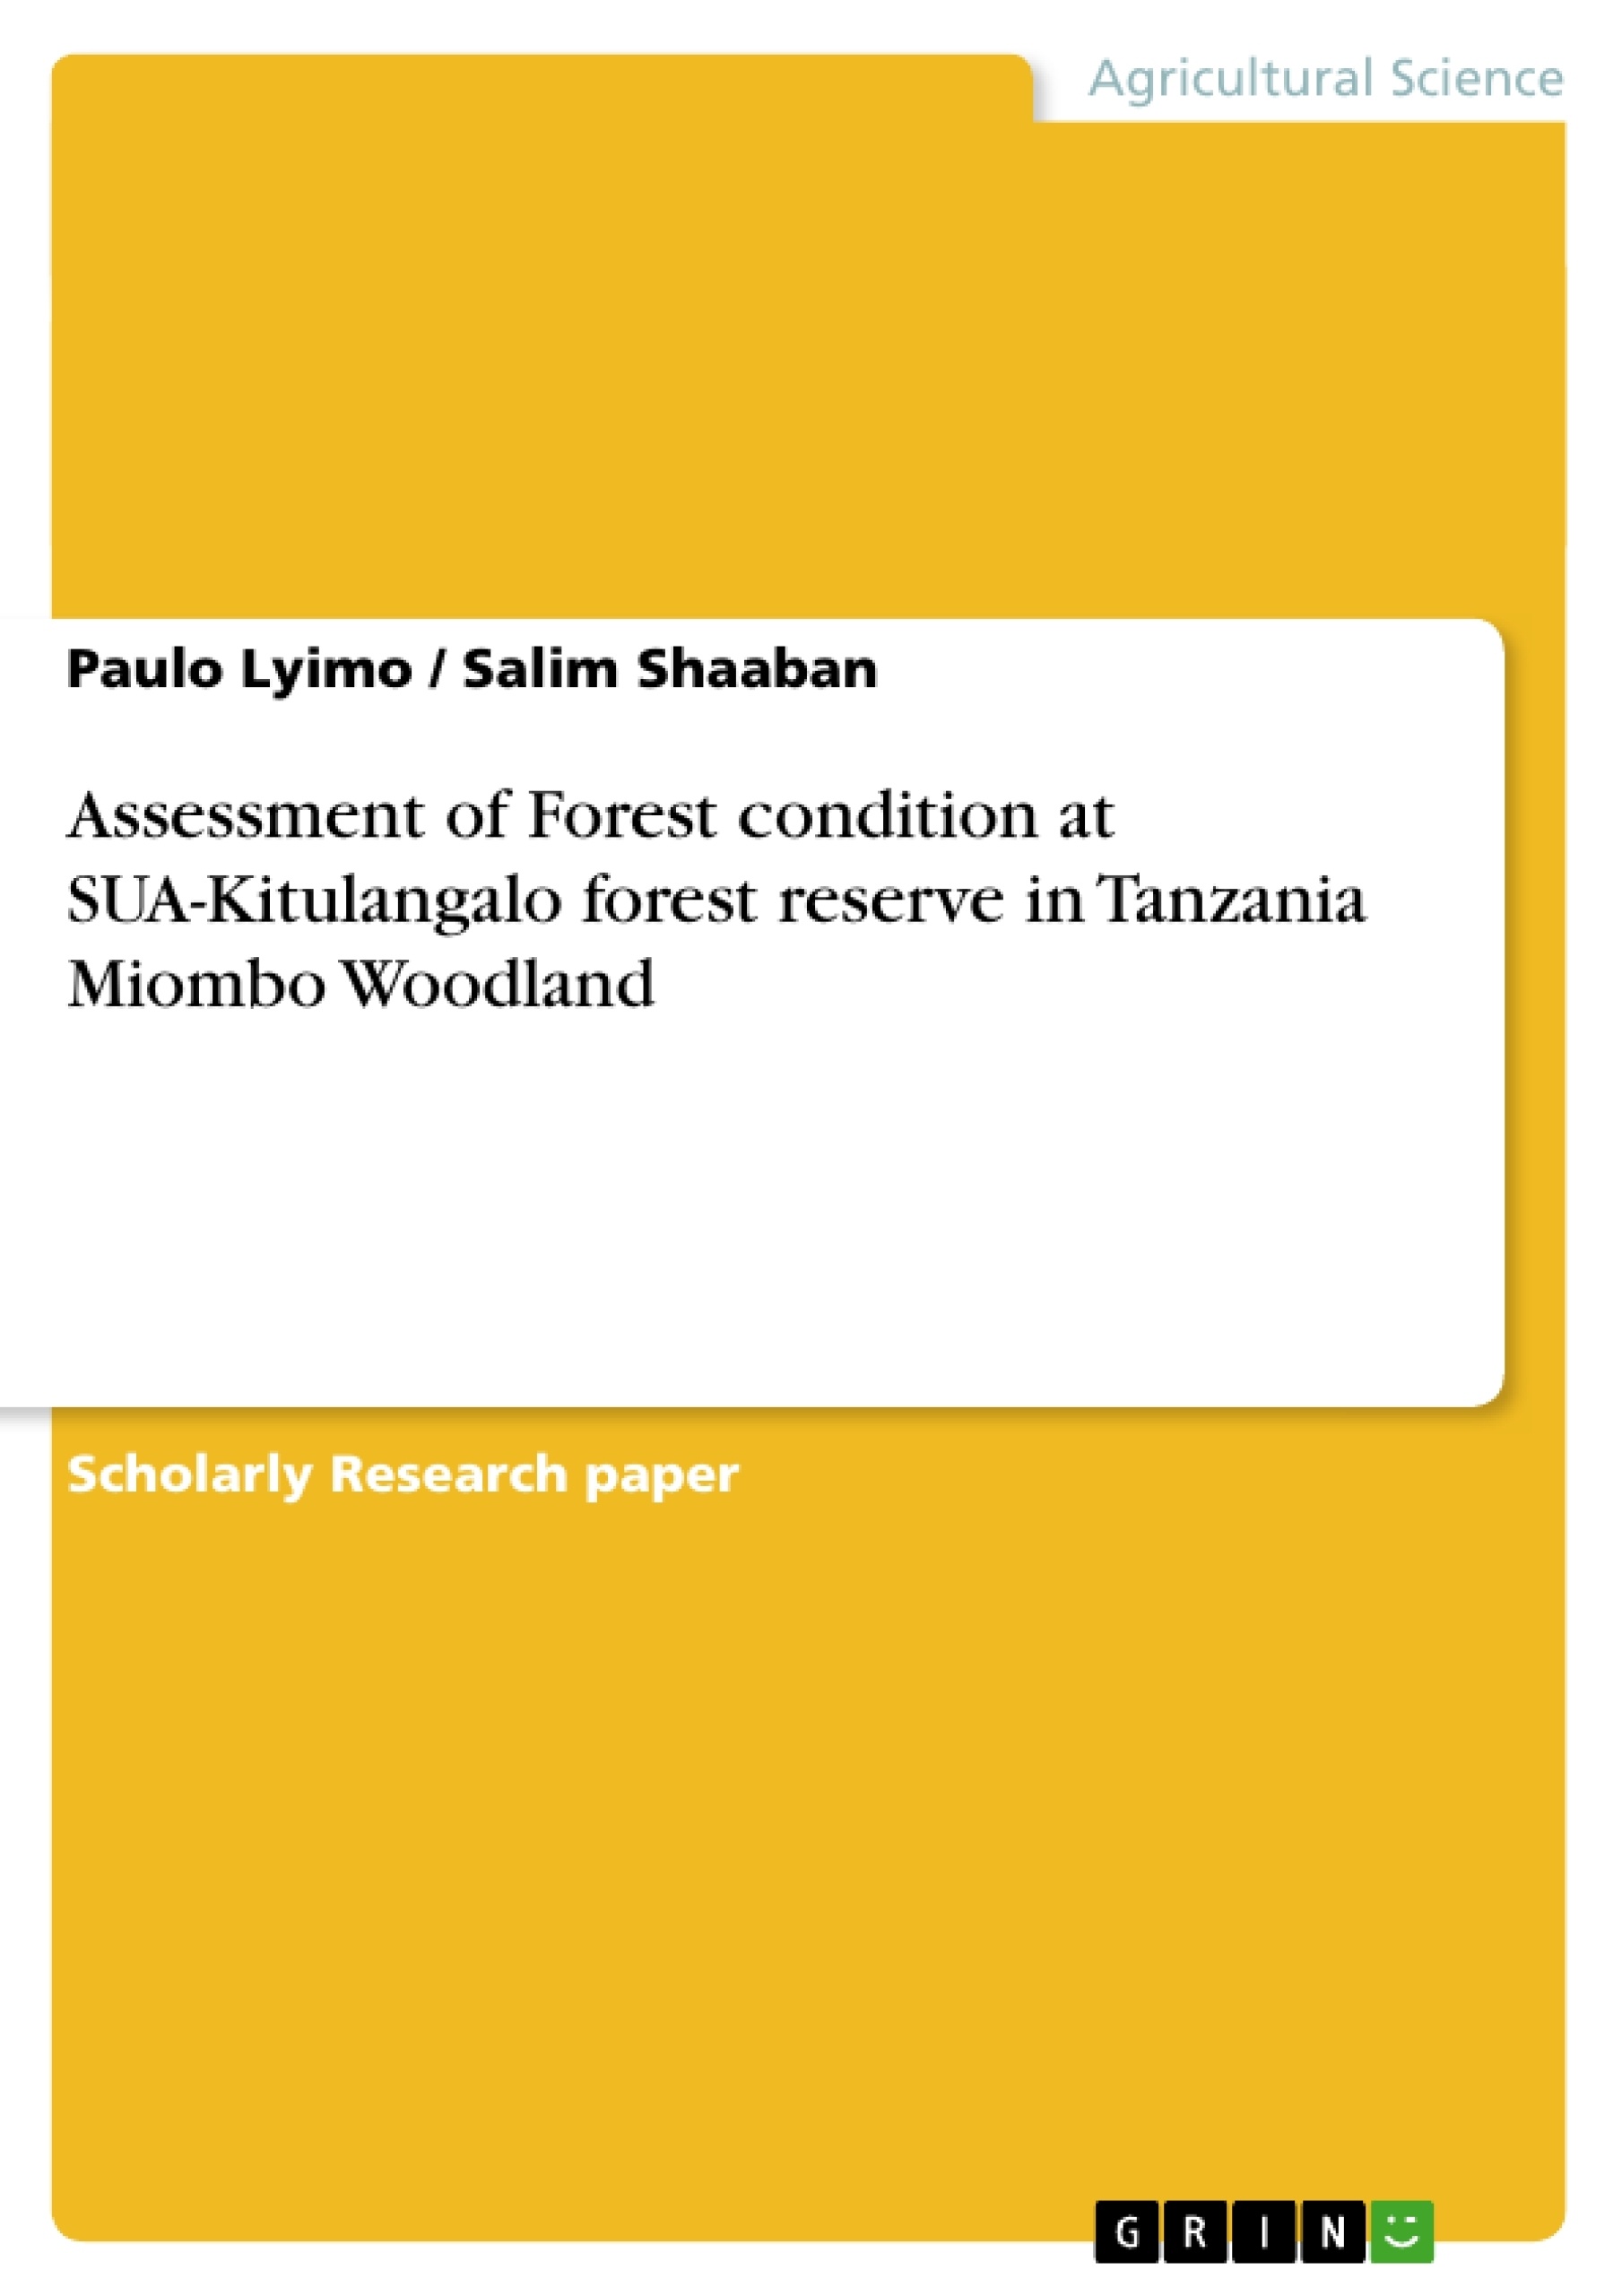 Título: Assessment of Forest condition at SUA-Kitulangalo forest reserve in Tanzania Miombo Woodland